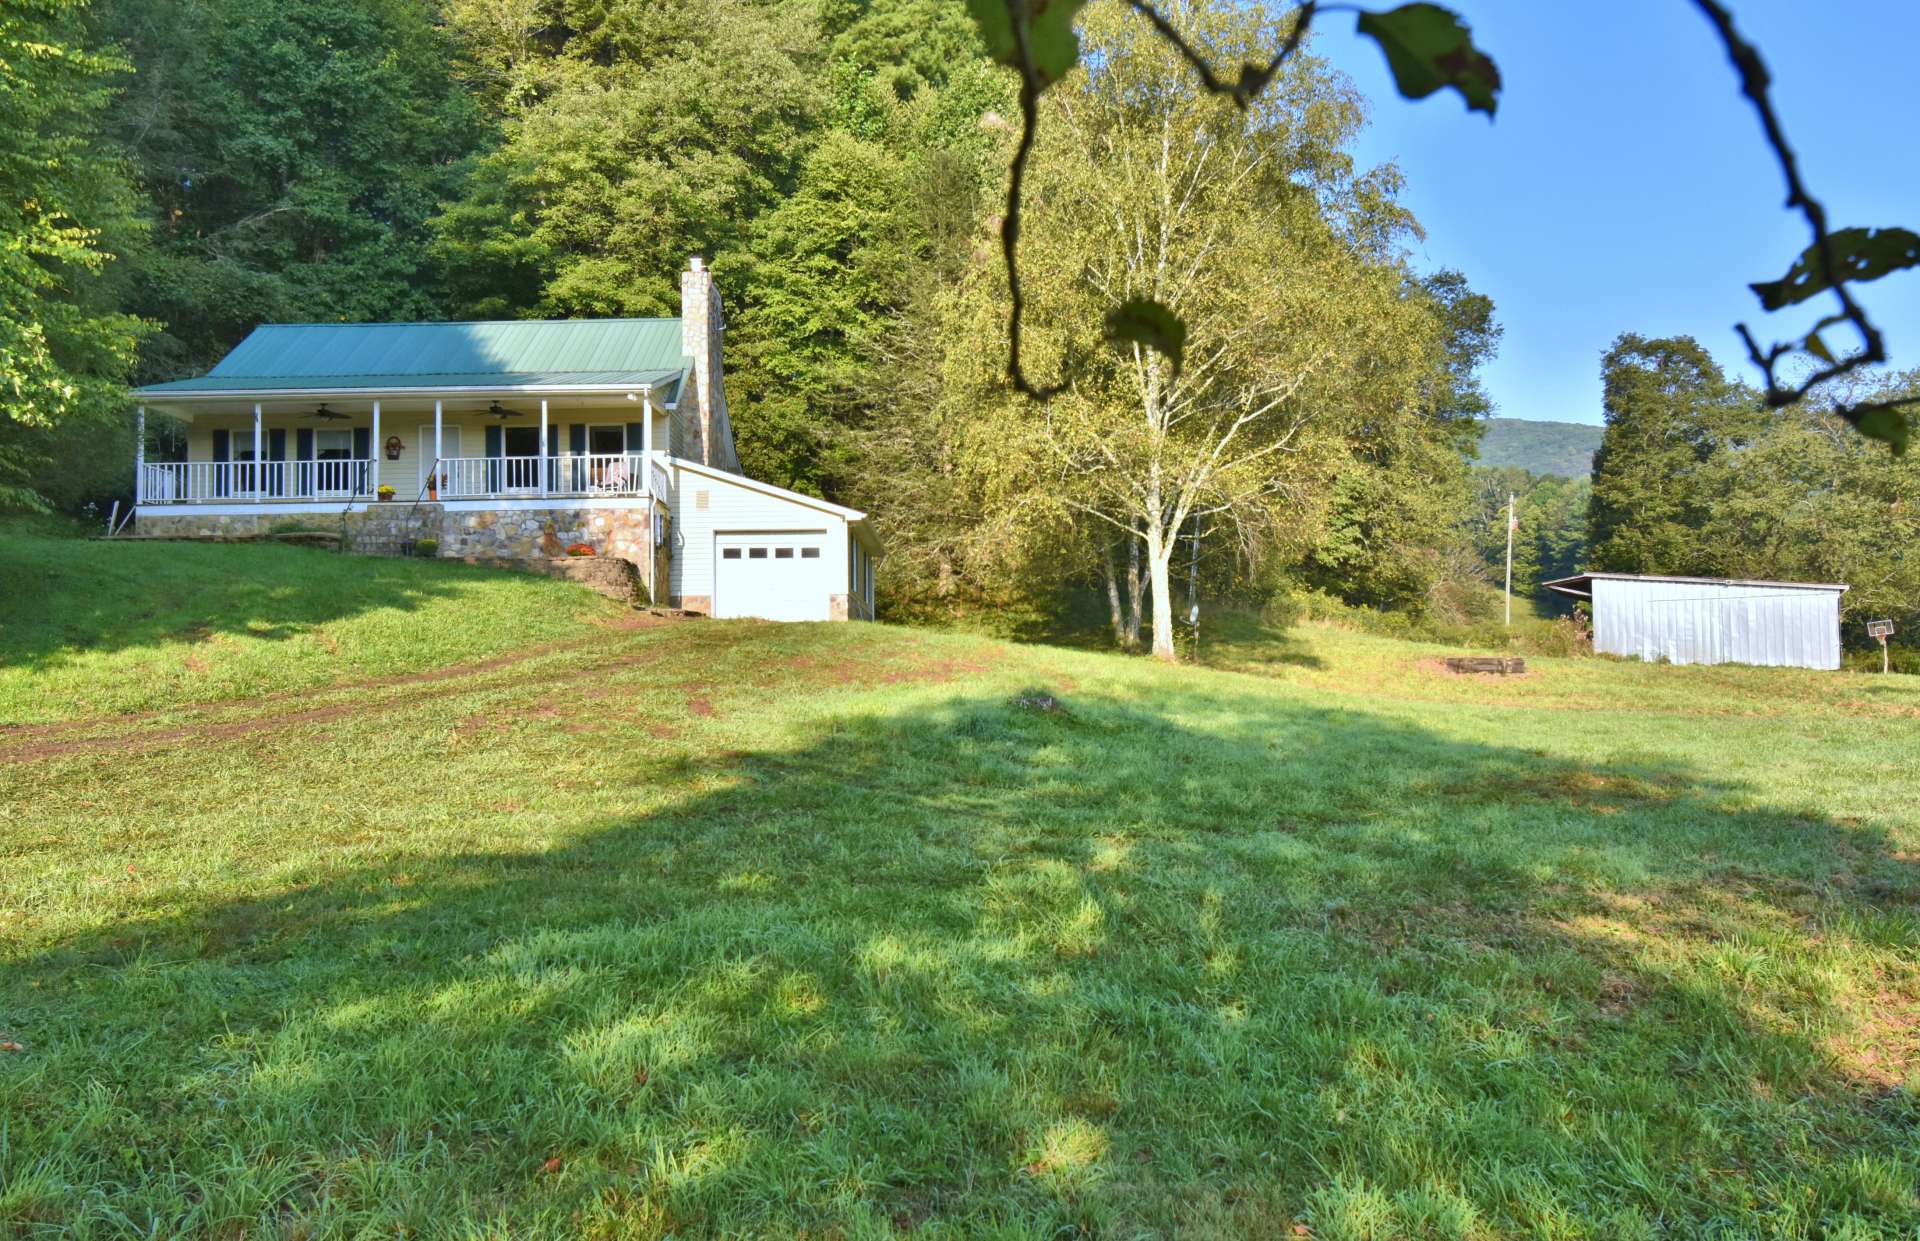 The location is convenient to Grayson Highlands State Park, horse trails, trout streams, the New River, Jefferson National Forest and other area amenities of the Mount Rogers Recreation Area.